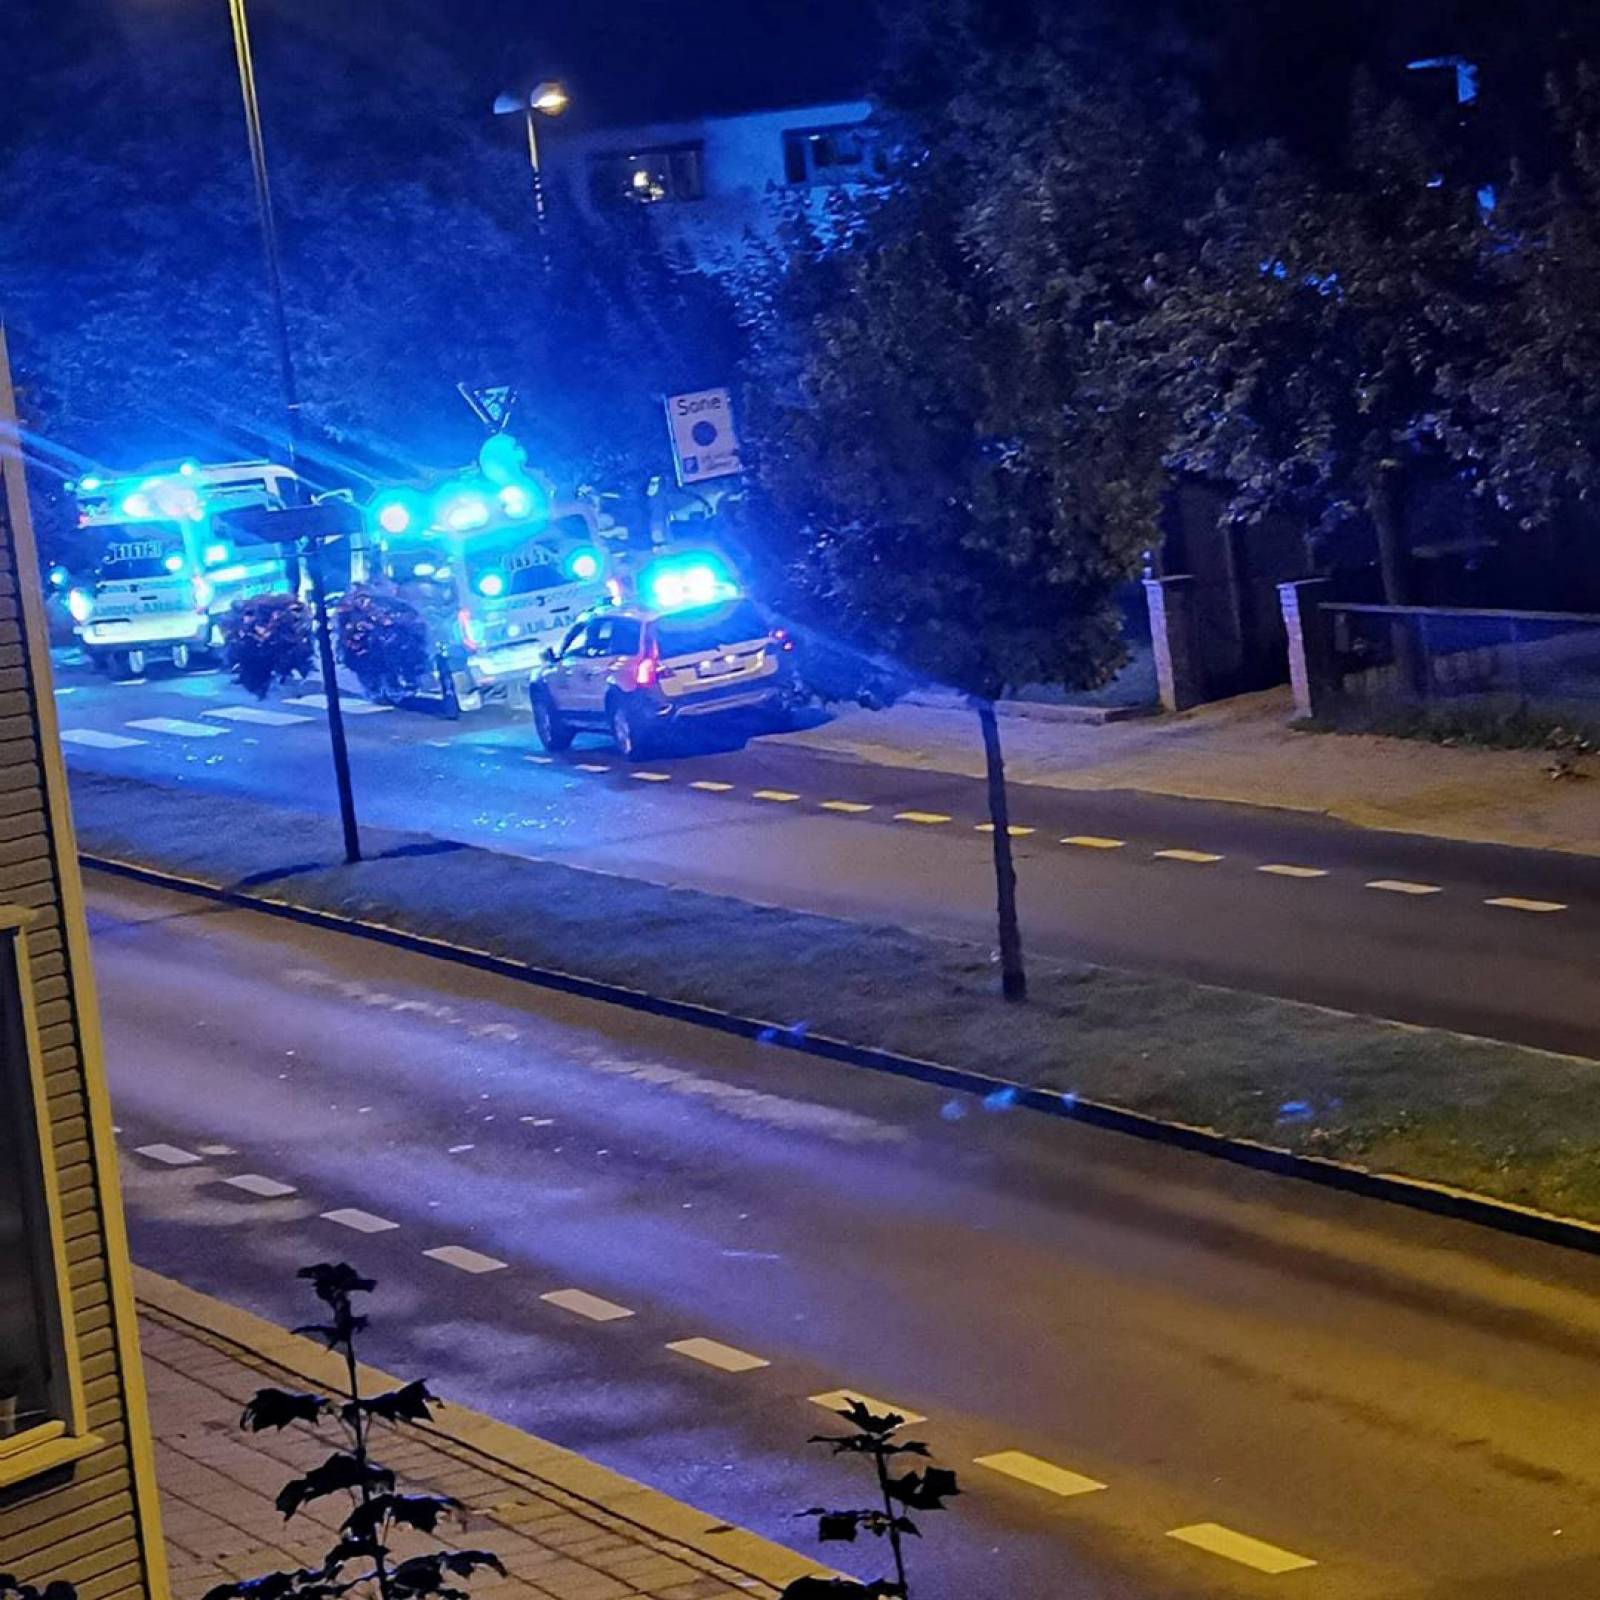 Police and emergency services are parked at the side of the road after people were stabbed in several locations in Sarpsborg